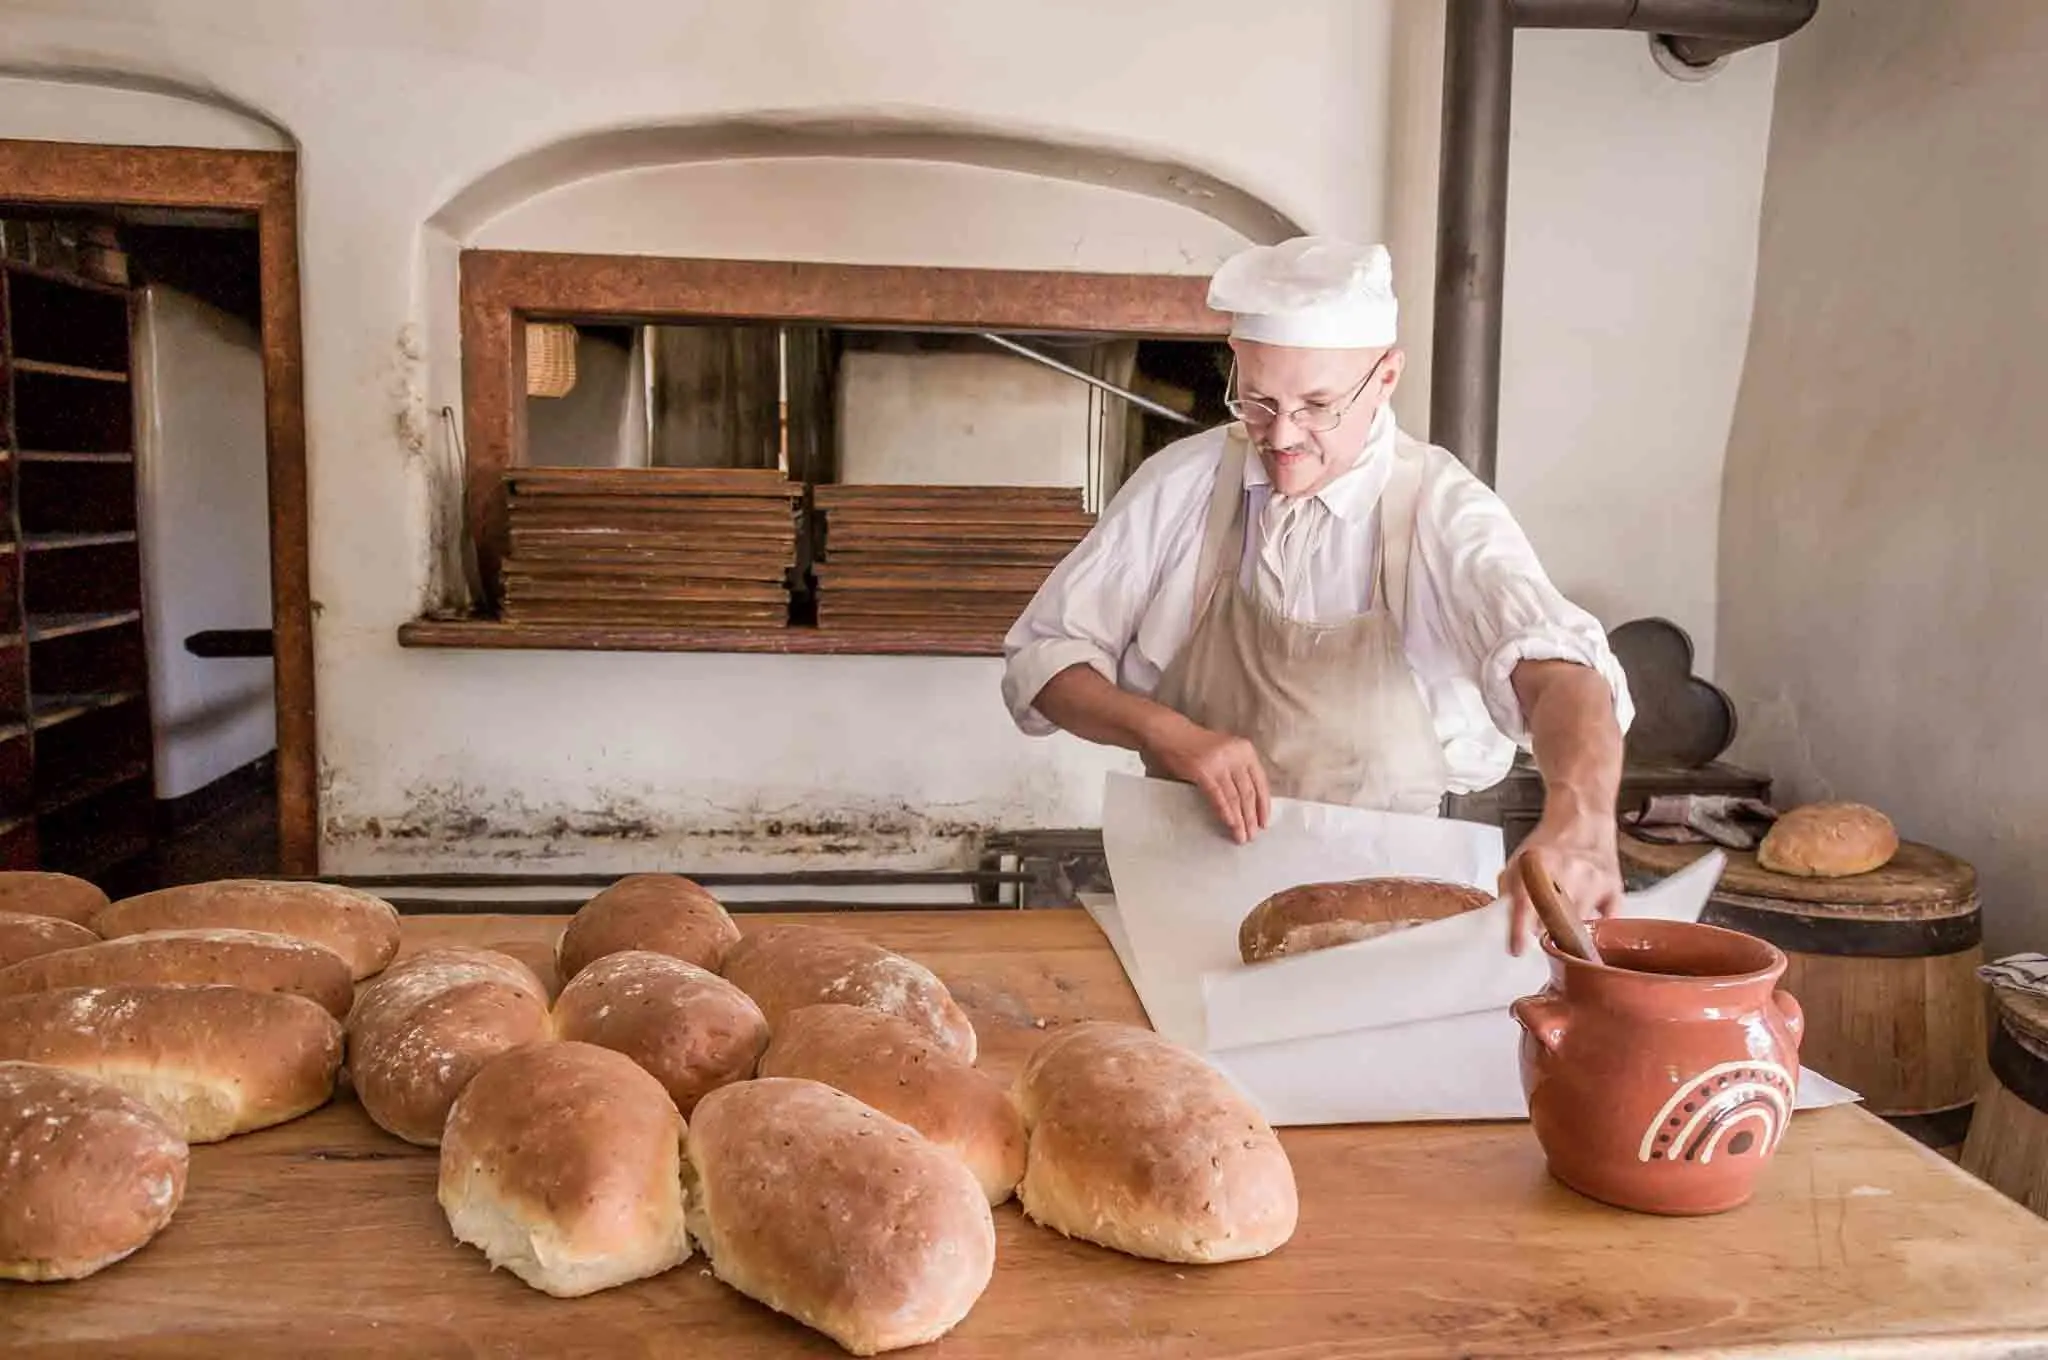 Baker buttering and wrapping bread at Old Salem NC